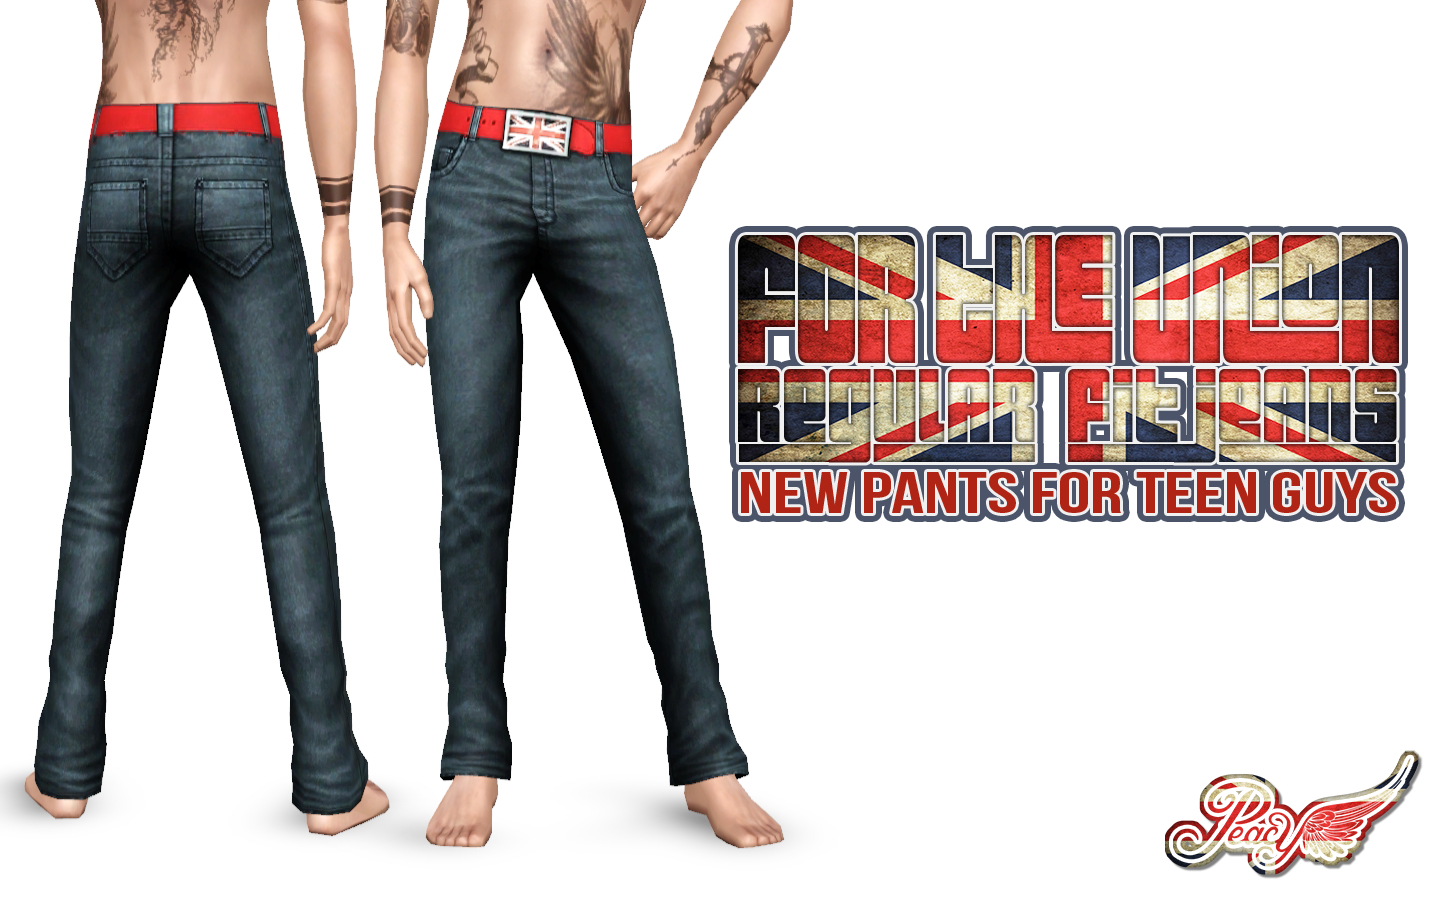 Simsational Designs: For the Union Regular Fit Jeans - Teen Version